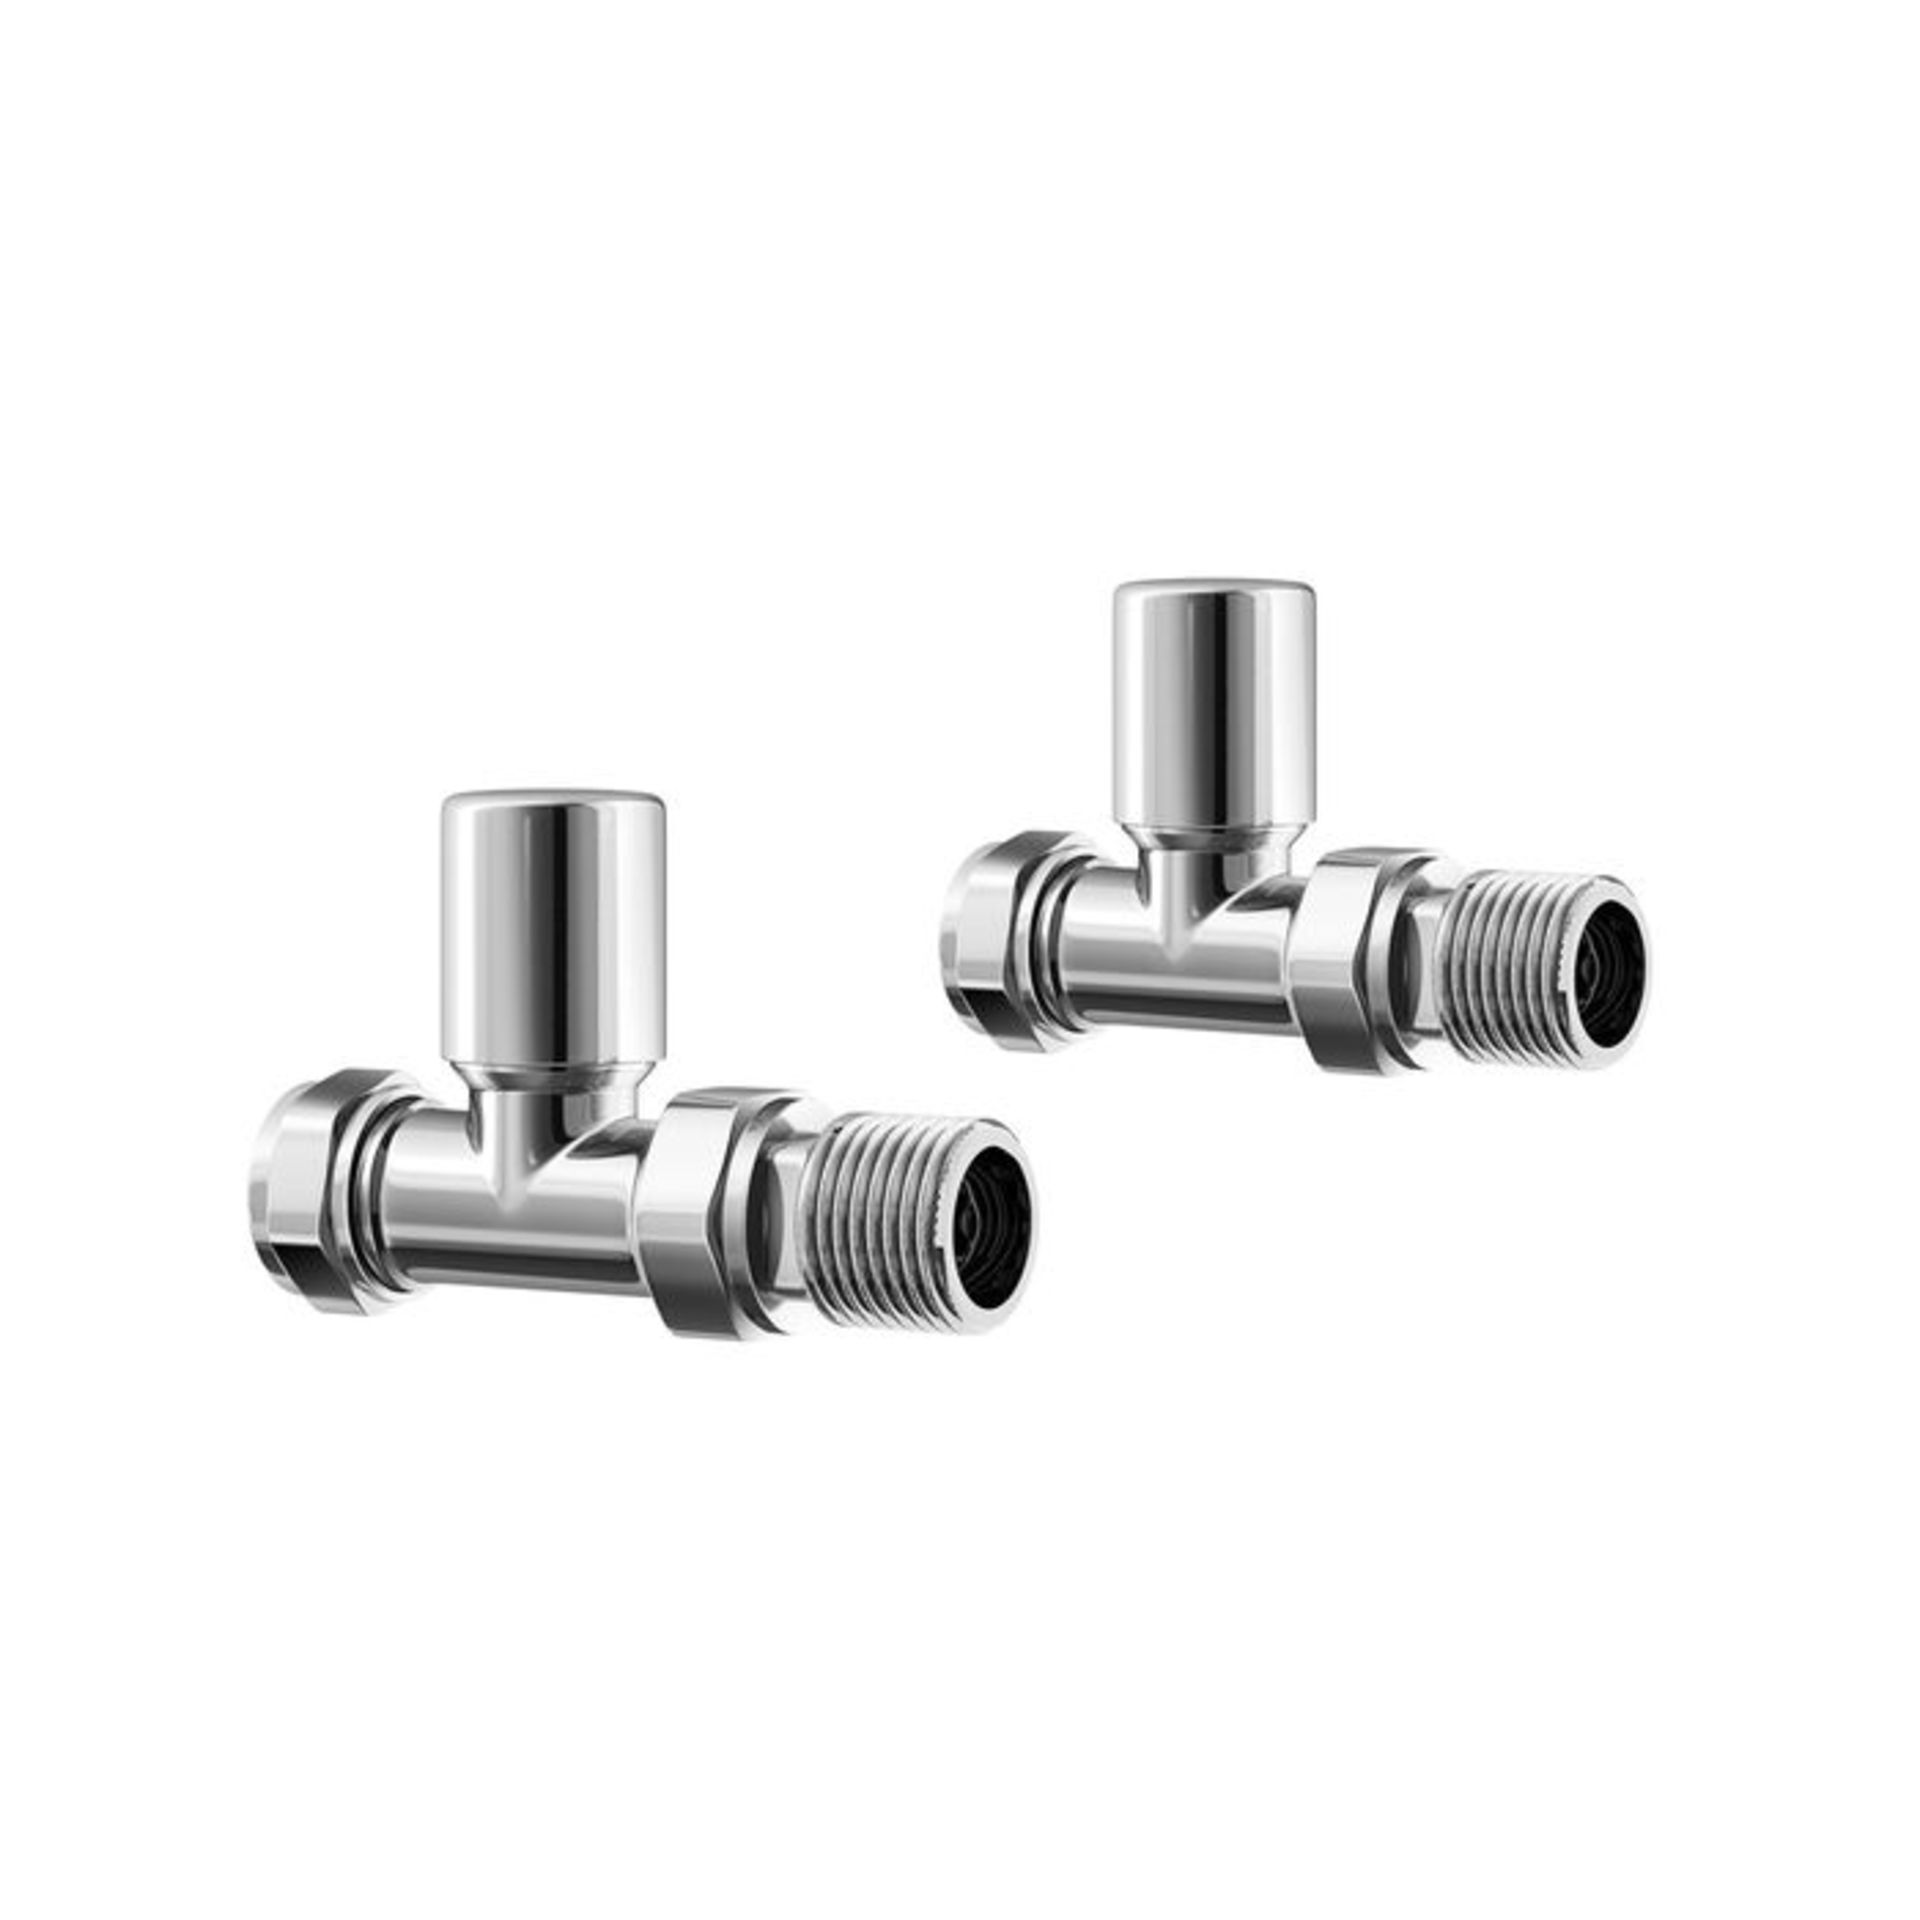 (NV1017) Standard 15mm Connection Straight Chrome Radiator Valves Chrome Plated Solid Brass S... - Image 2 of 2